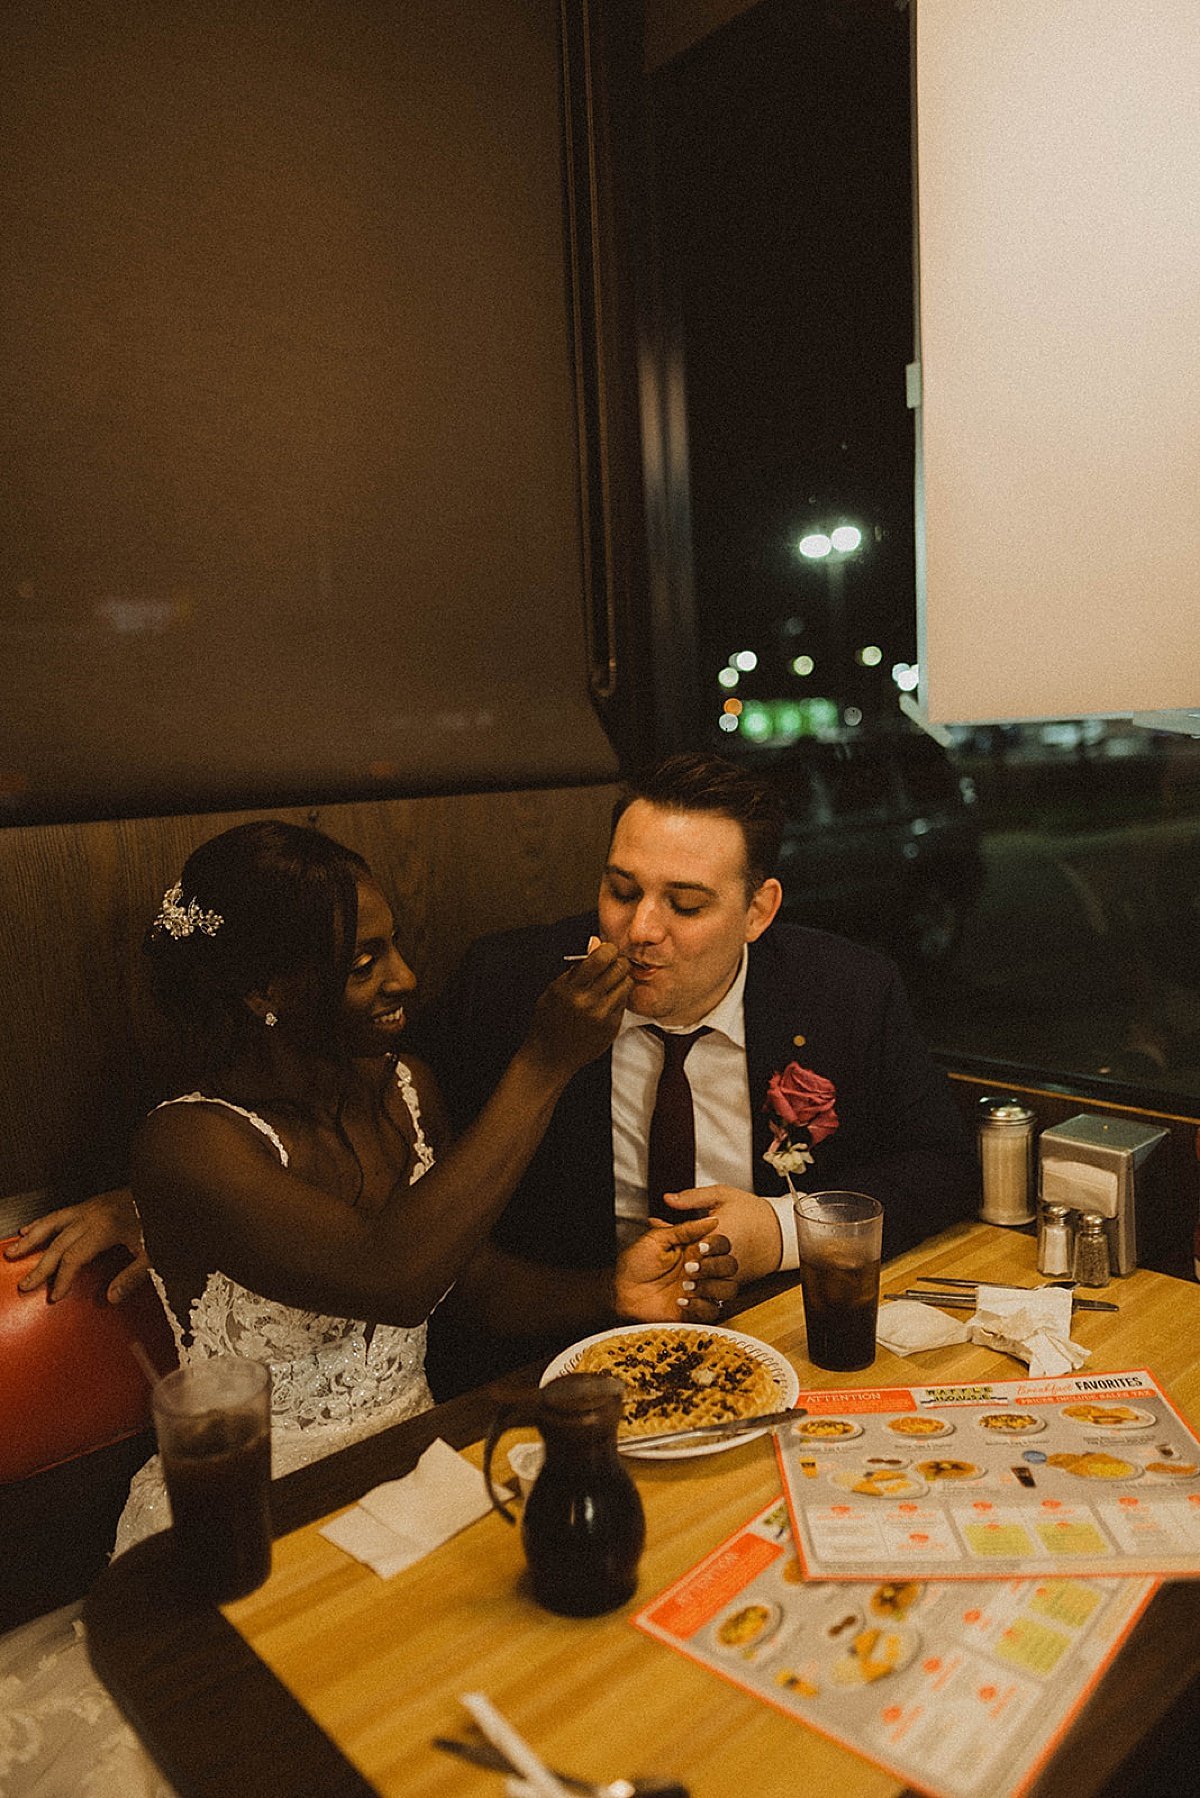  Bride and groom eat waffles at diner after wedding reception shot by theresa mcdonald 